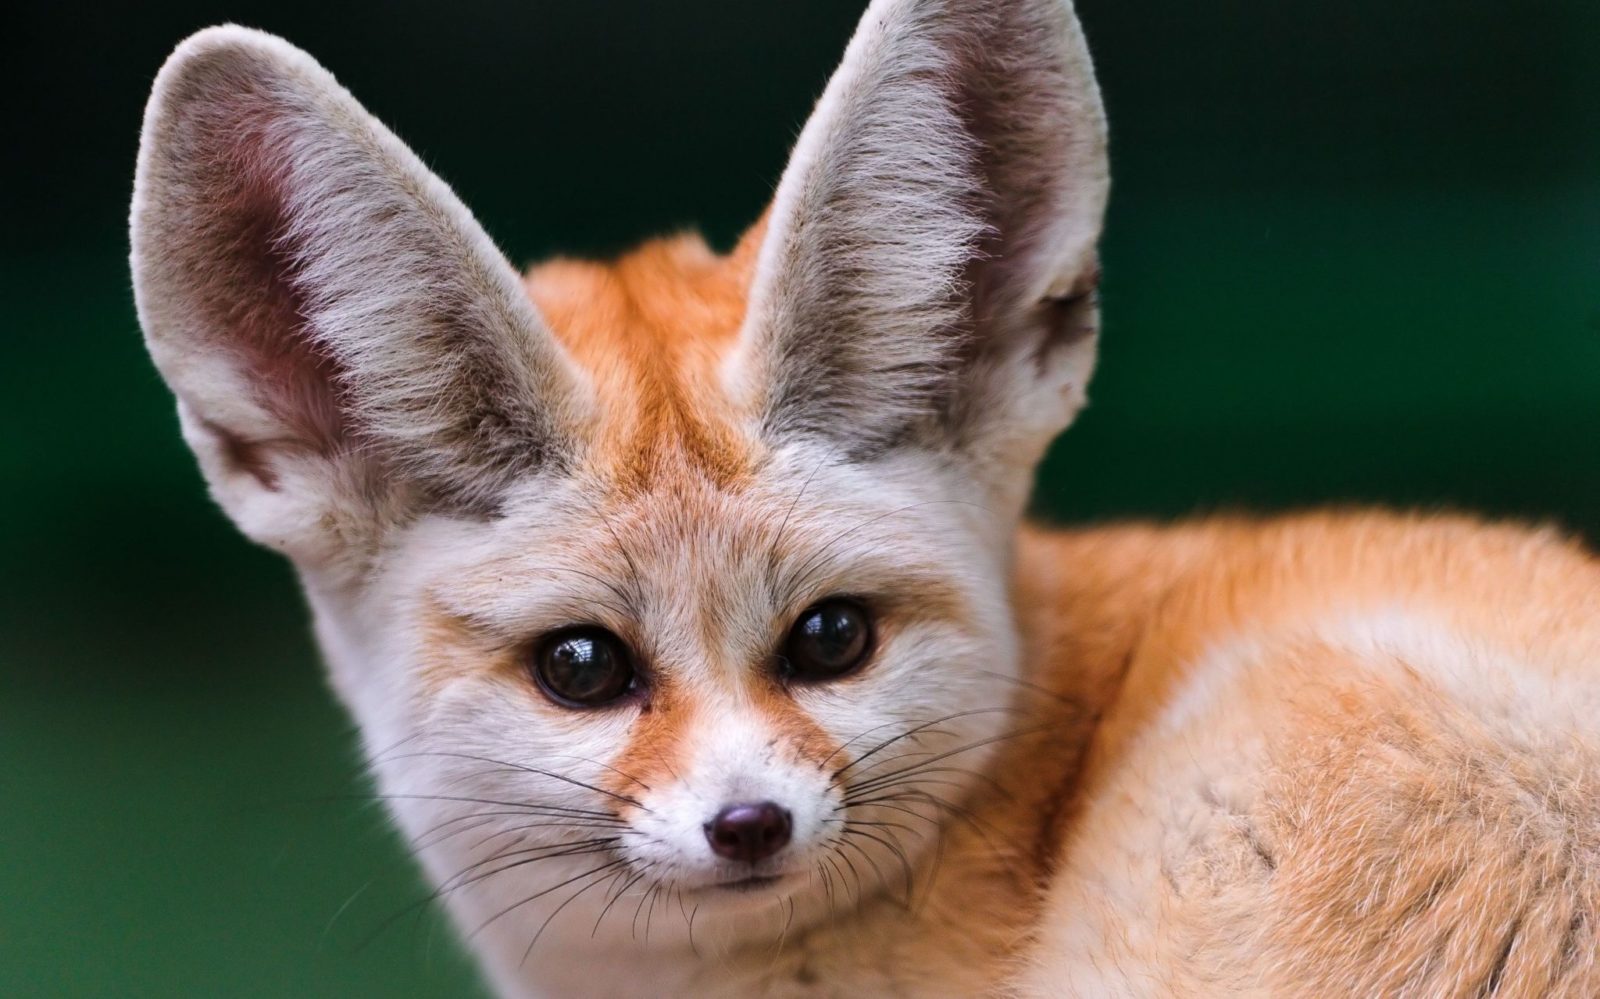 Fennec Fox As Pets Things To Know Before Taking Them As Pets,Quinoa Protein Bowl